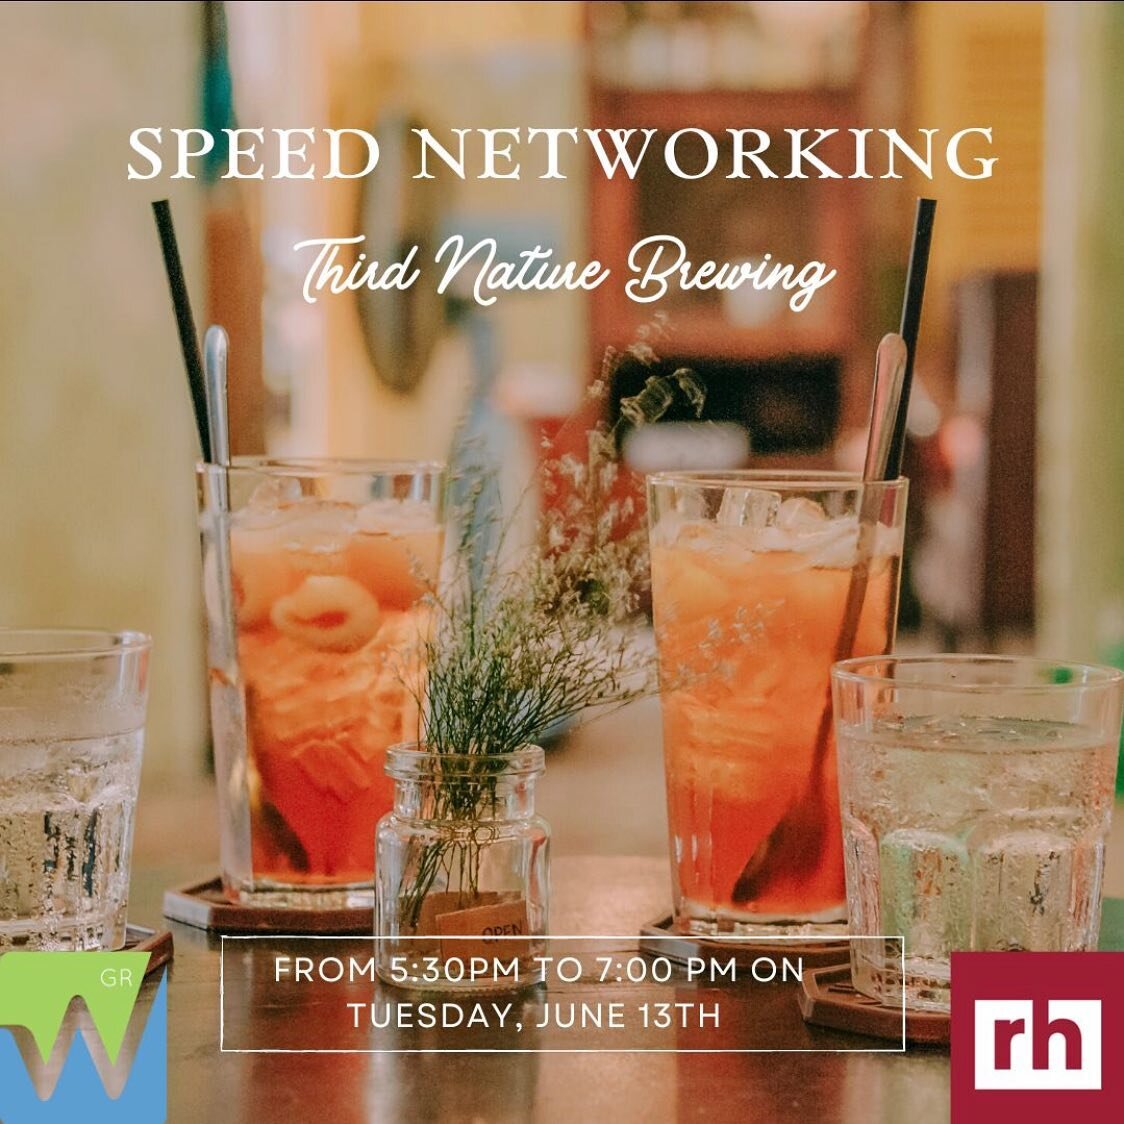 Registration is now open for the Speed Networking event at Third Nature Brewing on Tuesday, June 13th. Join us on their outdoor patio area for appetizers at 5:30pm, with the networking rounds kicking off at 6pm.
 
This group-based networking event wi